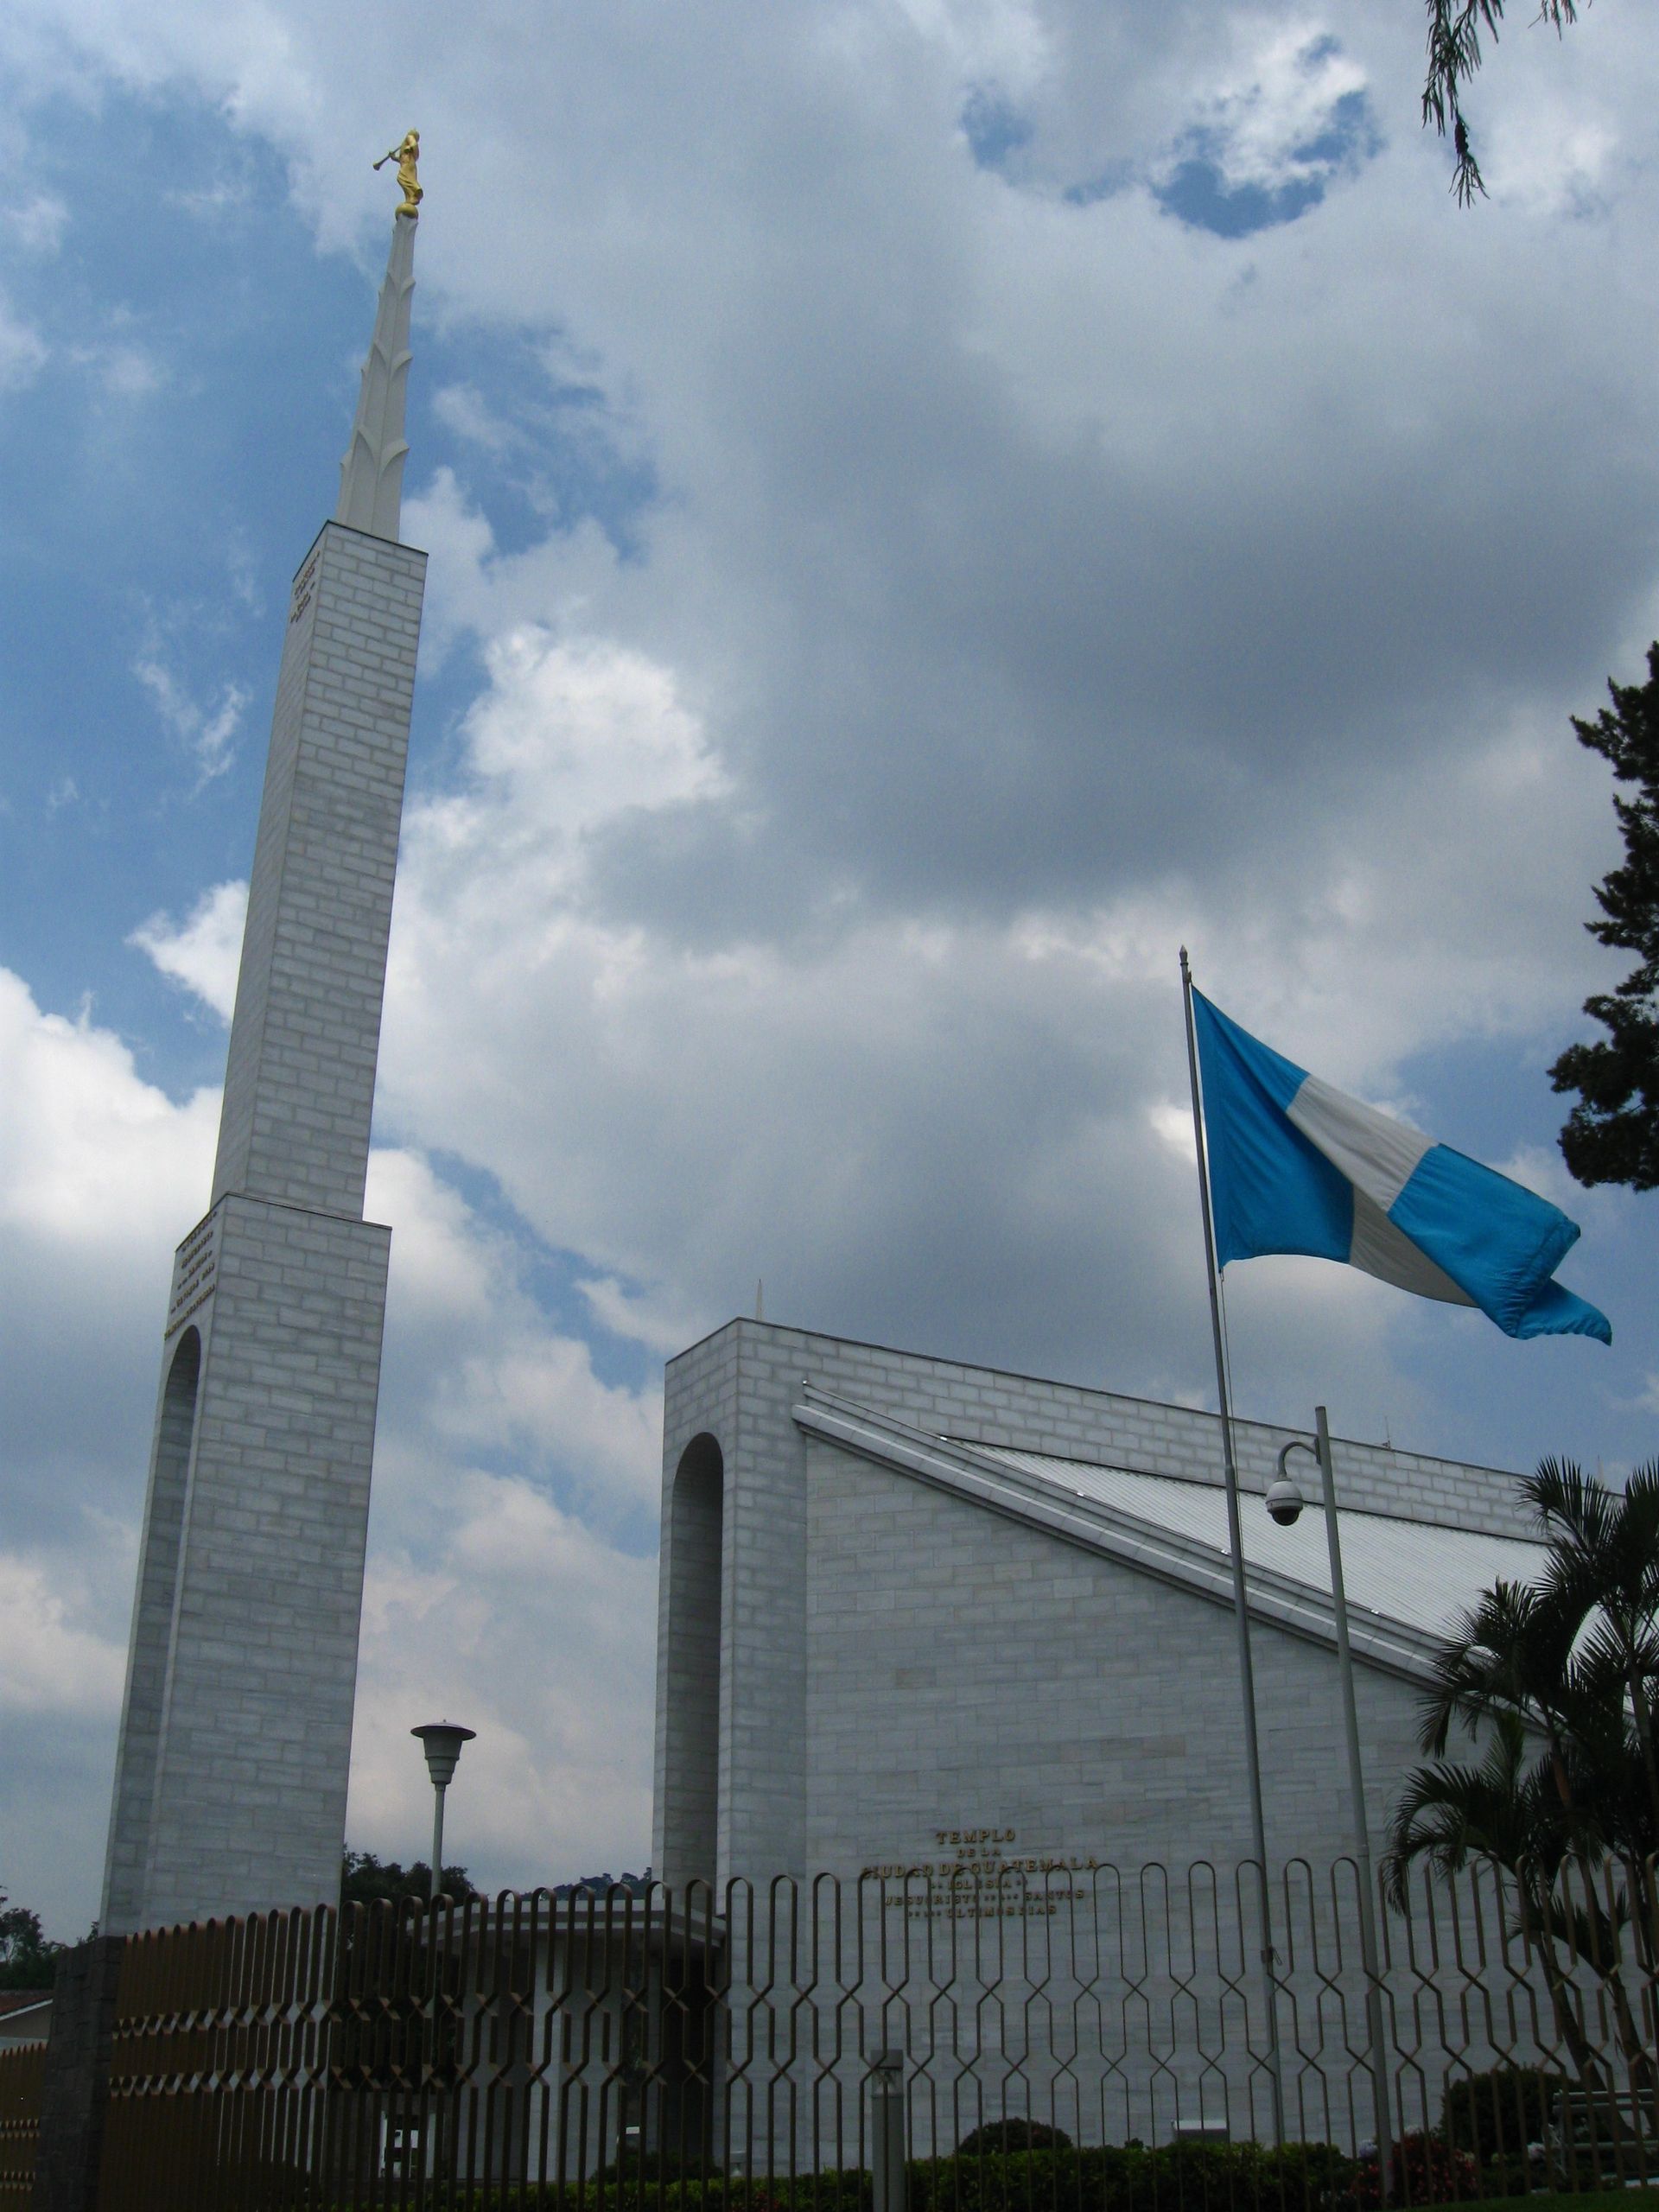 The Guatemala City Guatemala Temple side view, including the spire, flag, and gates.